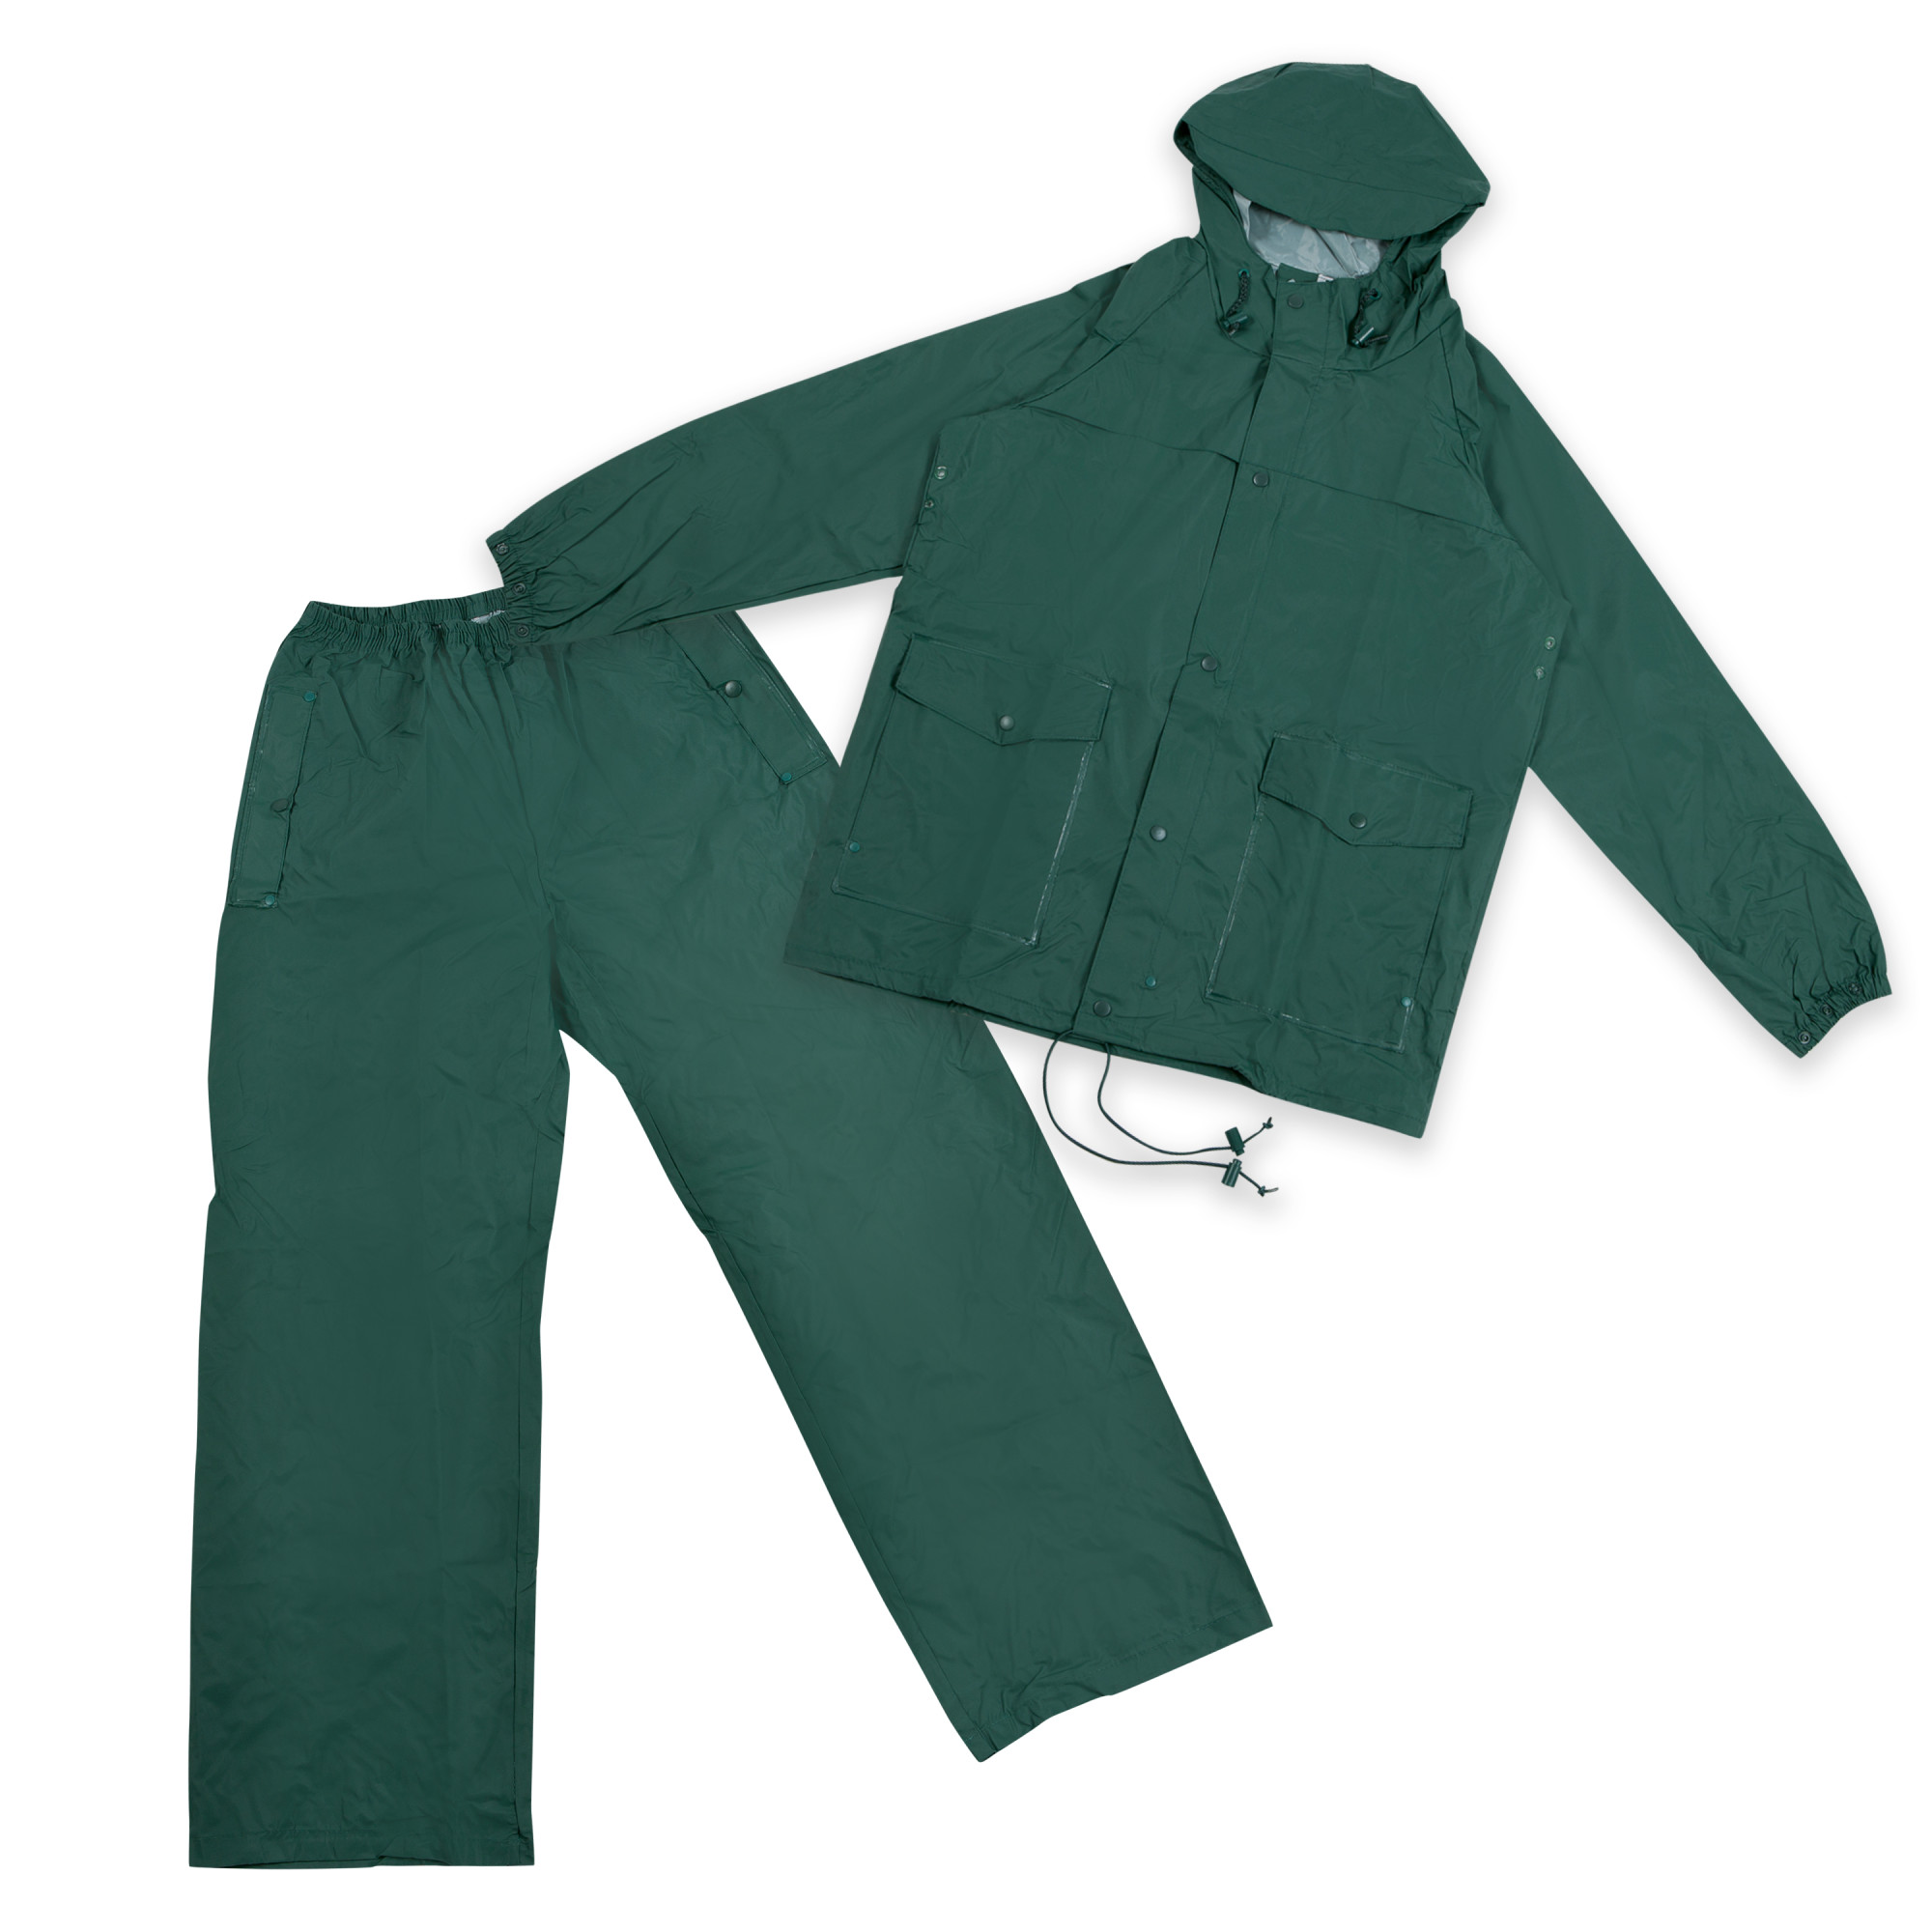 Stansport PVC-Nylon Deluxe Rain Suit -Small- Forest Green Adult Mens - image 1 of 1